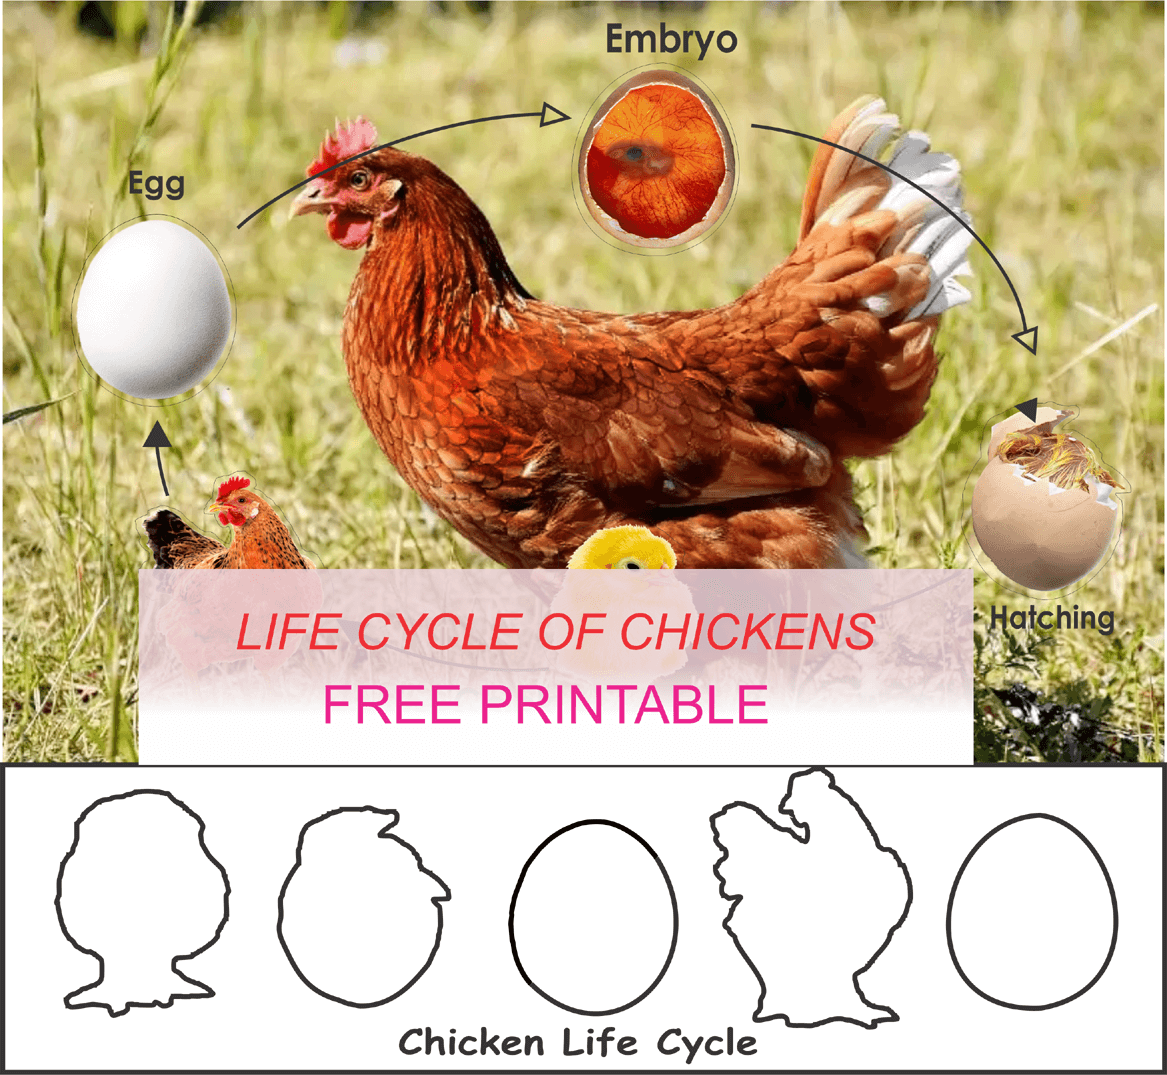 Life Cycle of Chickens